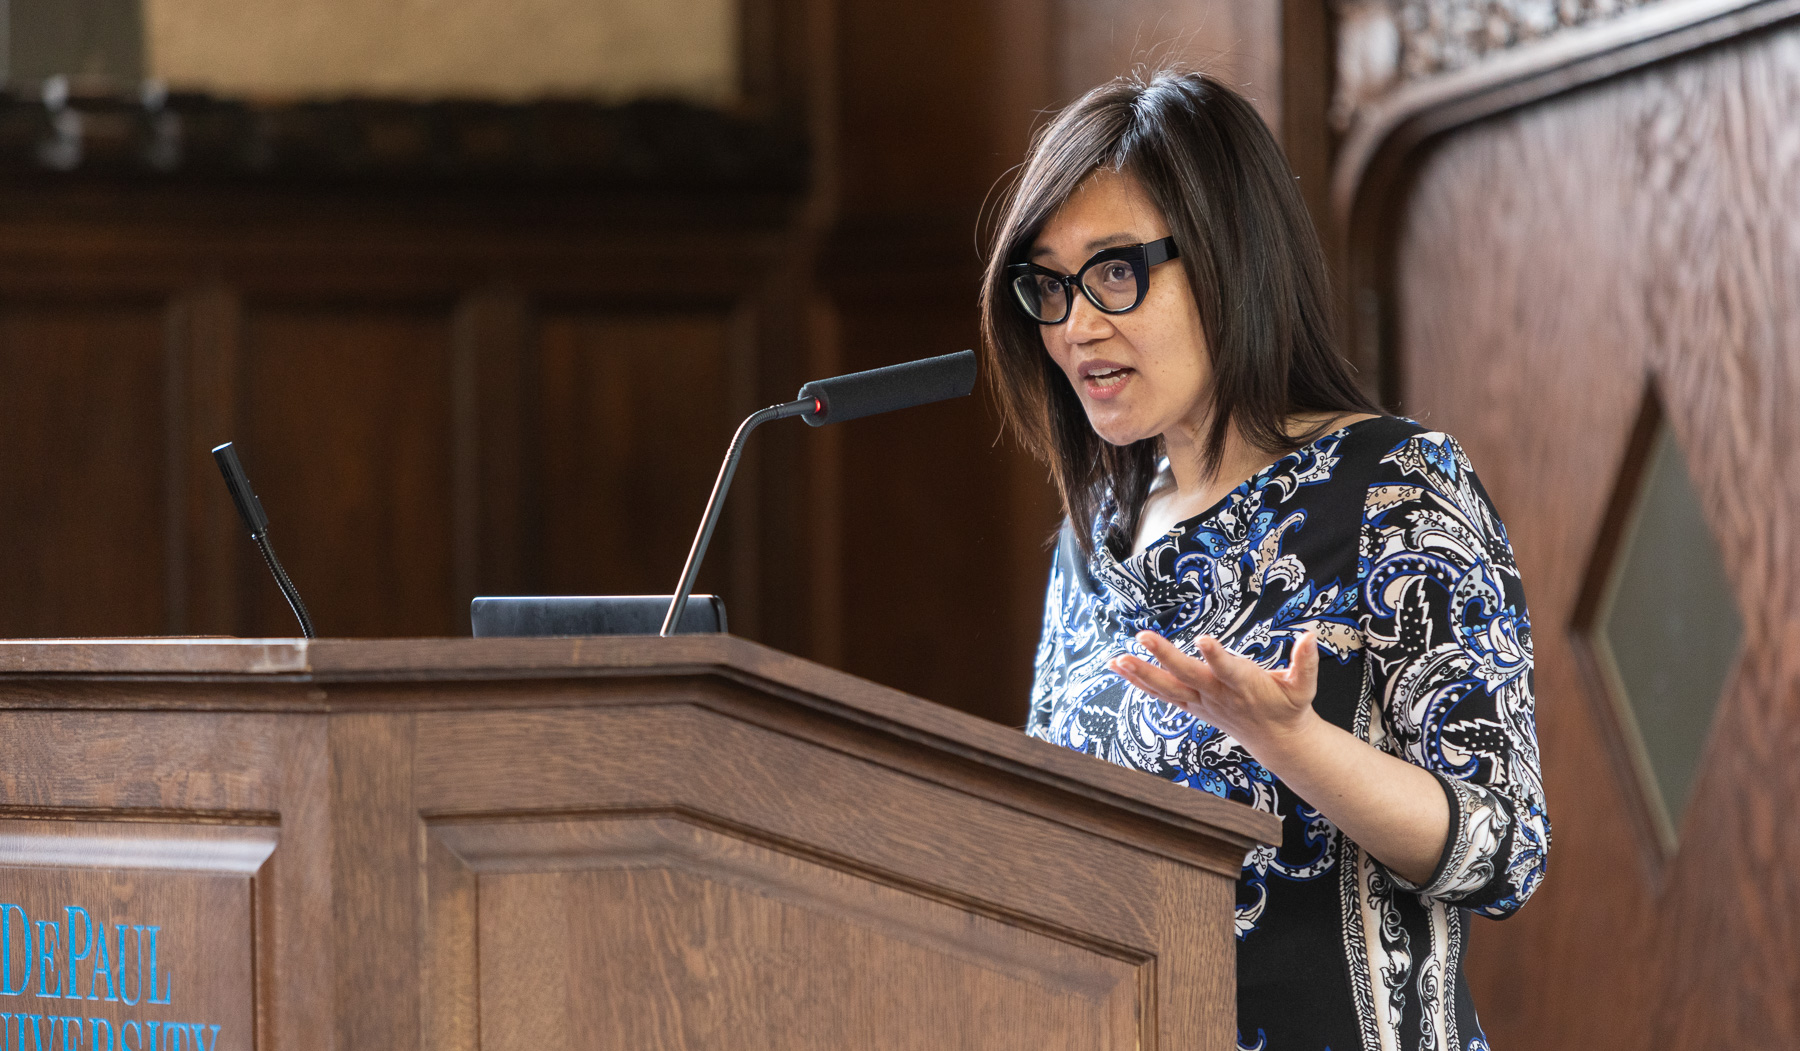 The event educated participants about relevant contemporary issues impacting the Asian/Asian Pacific Islander American community and cultivate collaborative opportunities to serve as allies for social justice. (DePaul University/Jeff Carrion)